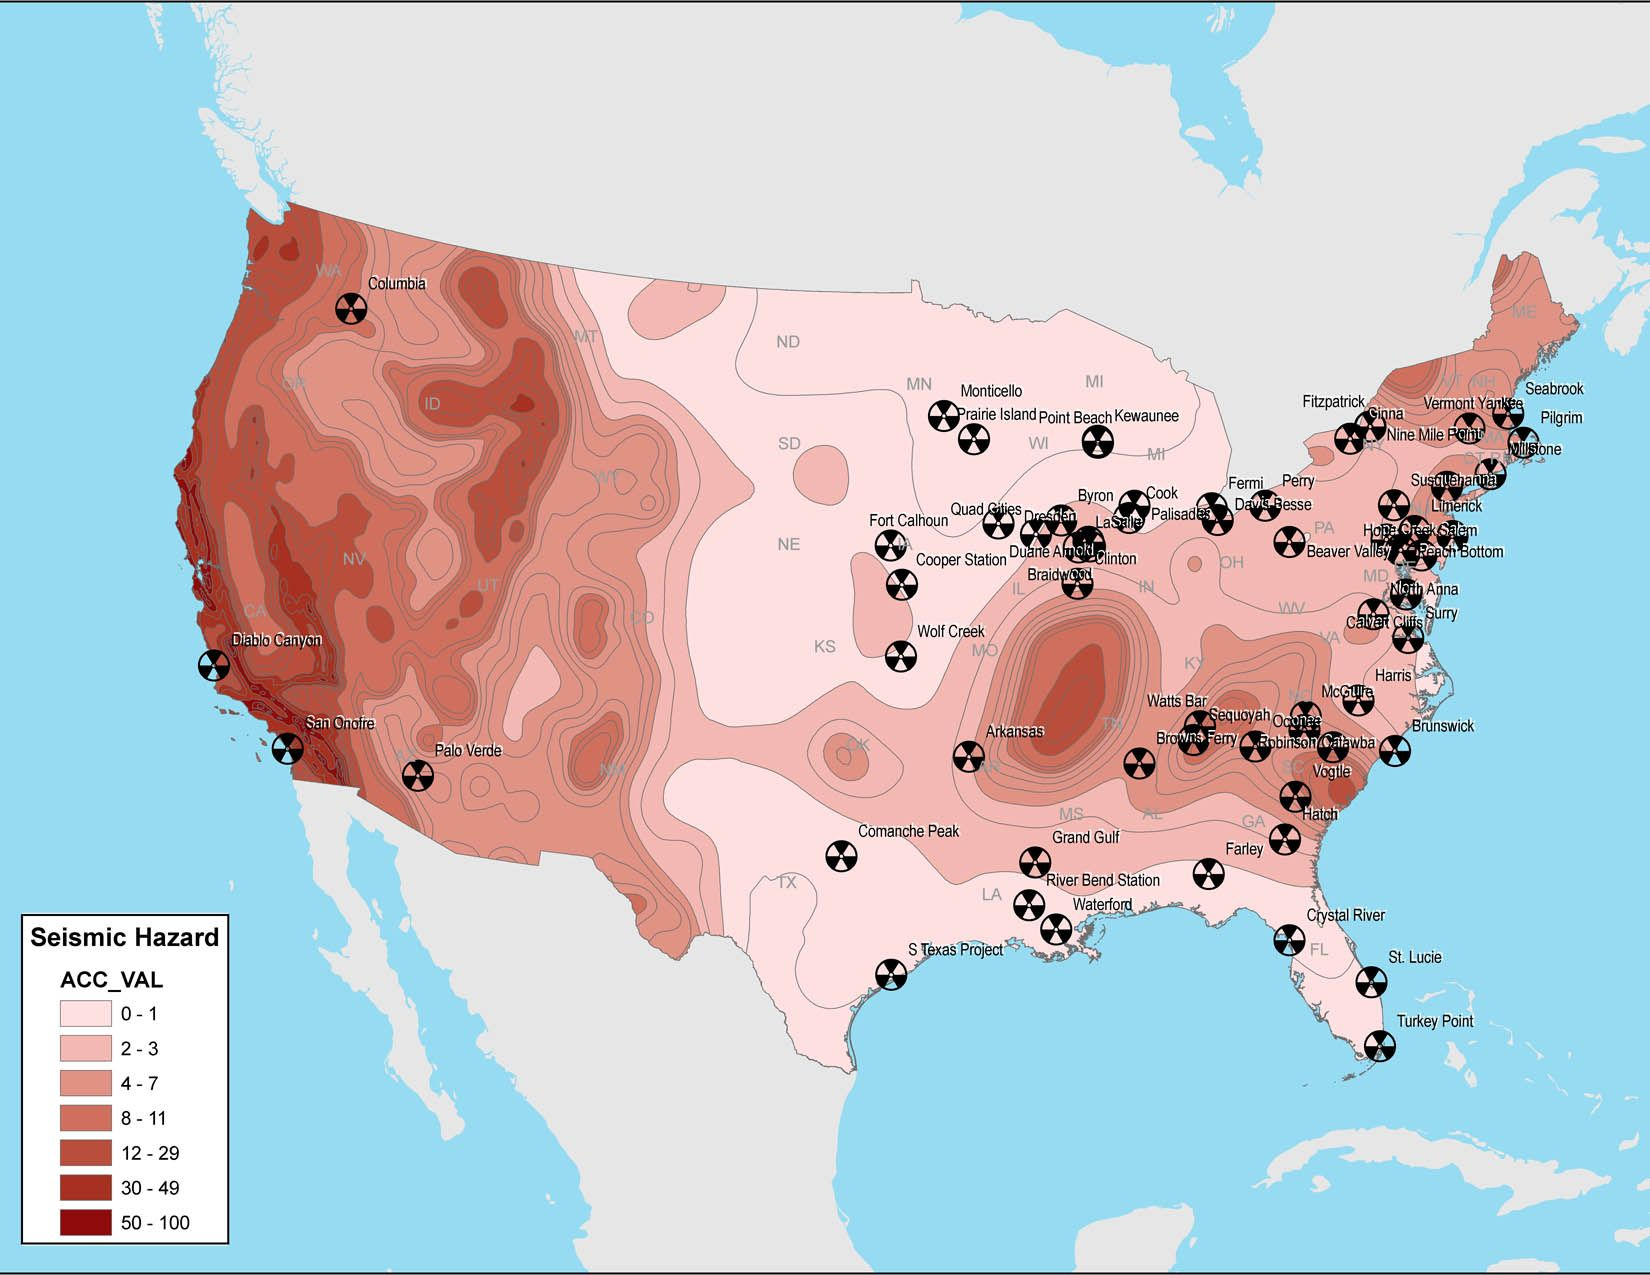 New Maps Of Nuclear Power Plants And Seismic Hazards In The United States Greenpeace Nuclear